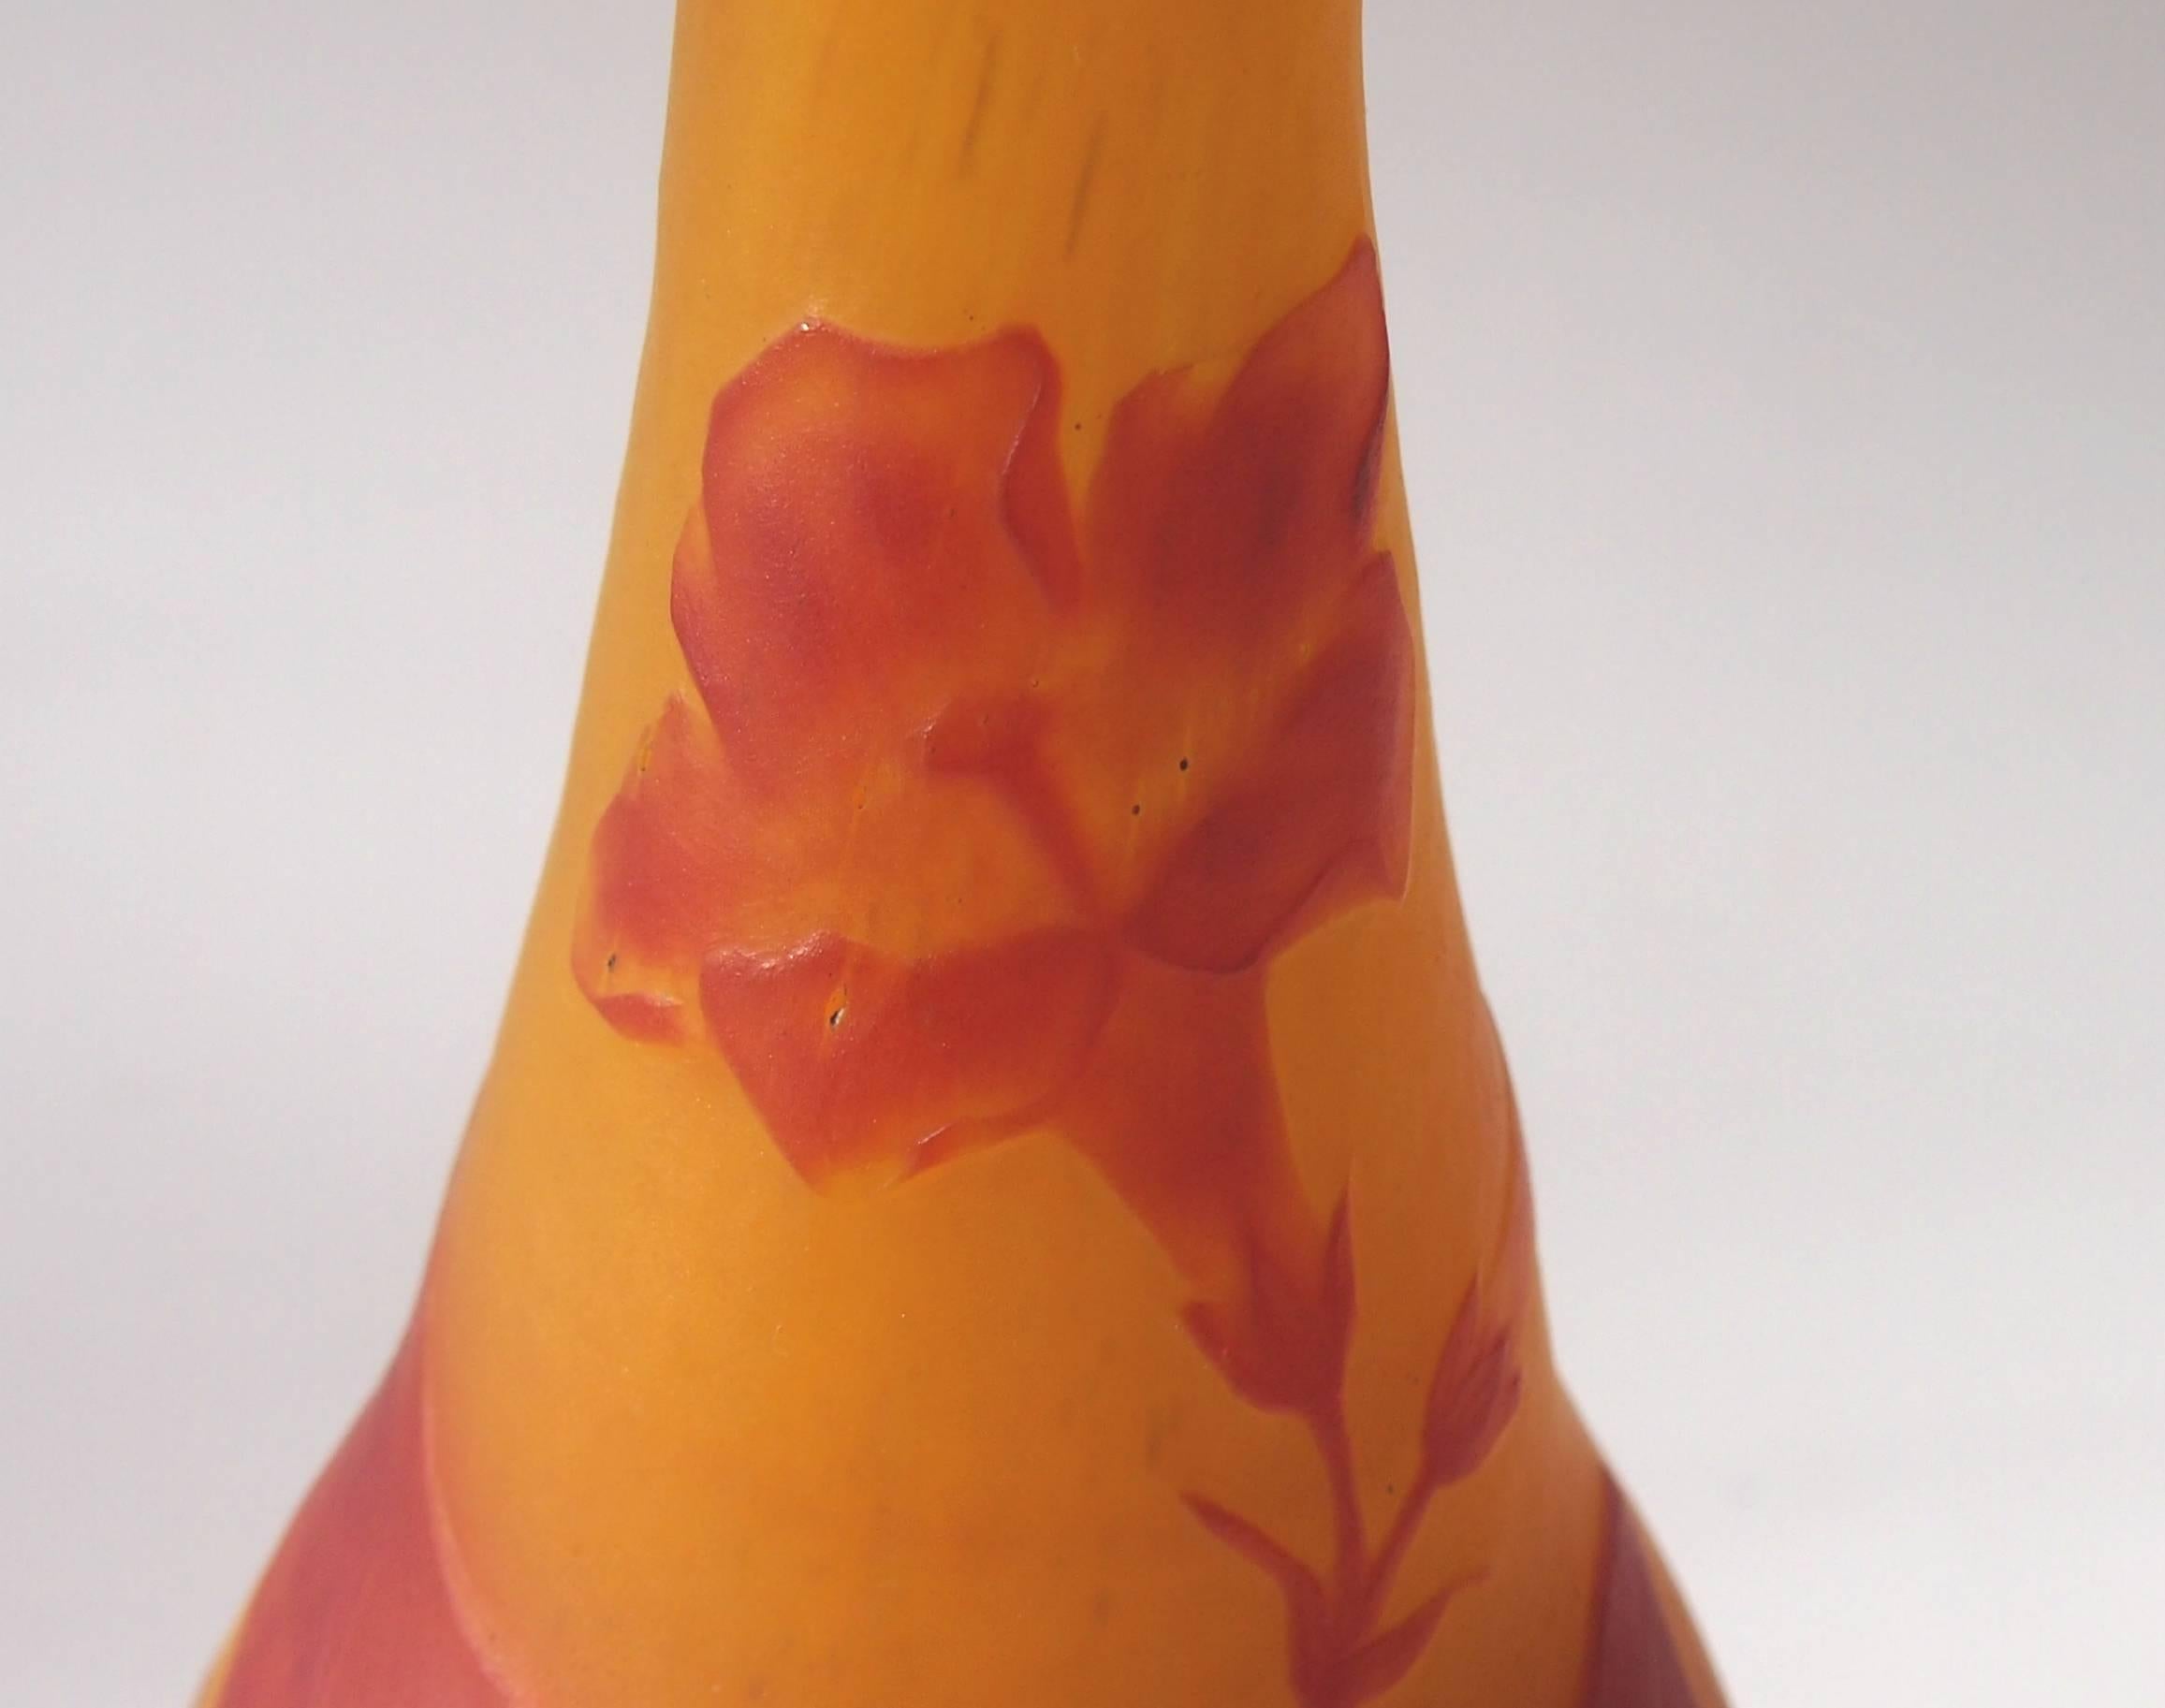 A super Daum Art Nouveau vase depicting the Nicotiana (Tobacco) plant in red over orange -beautifully signed. It employs all three of the most sophisticated techniques used by Daum at the time. The lower part with the base of the plant is executed